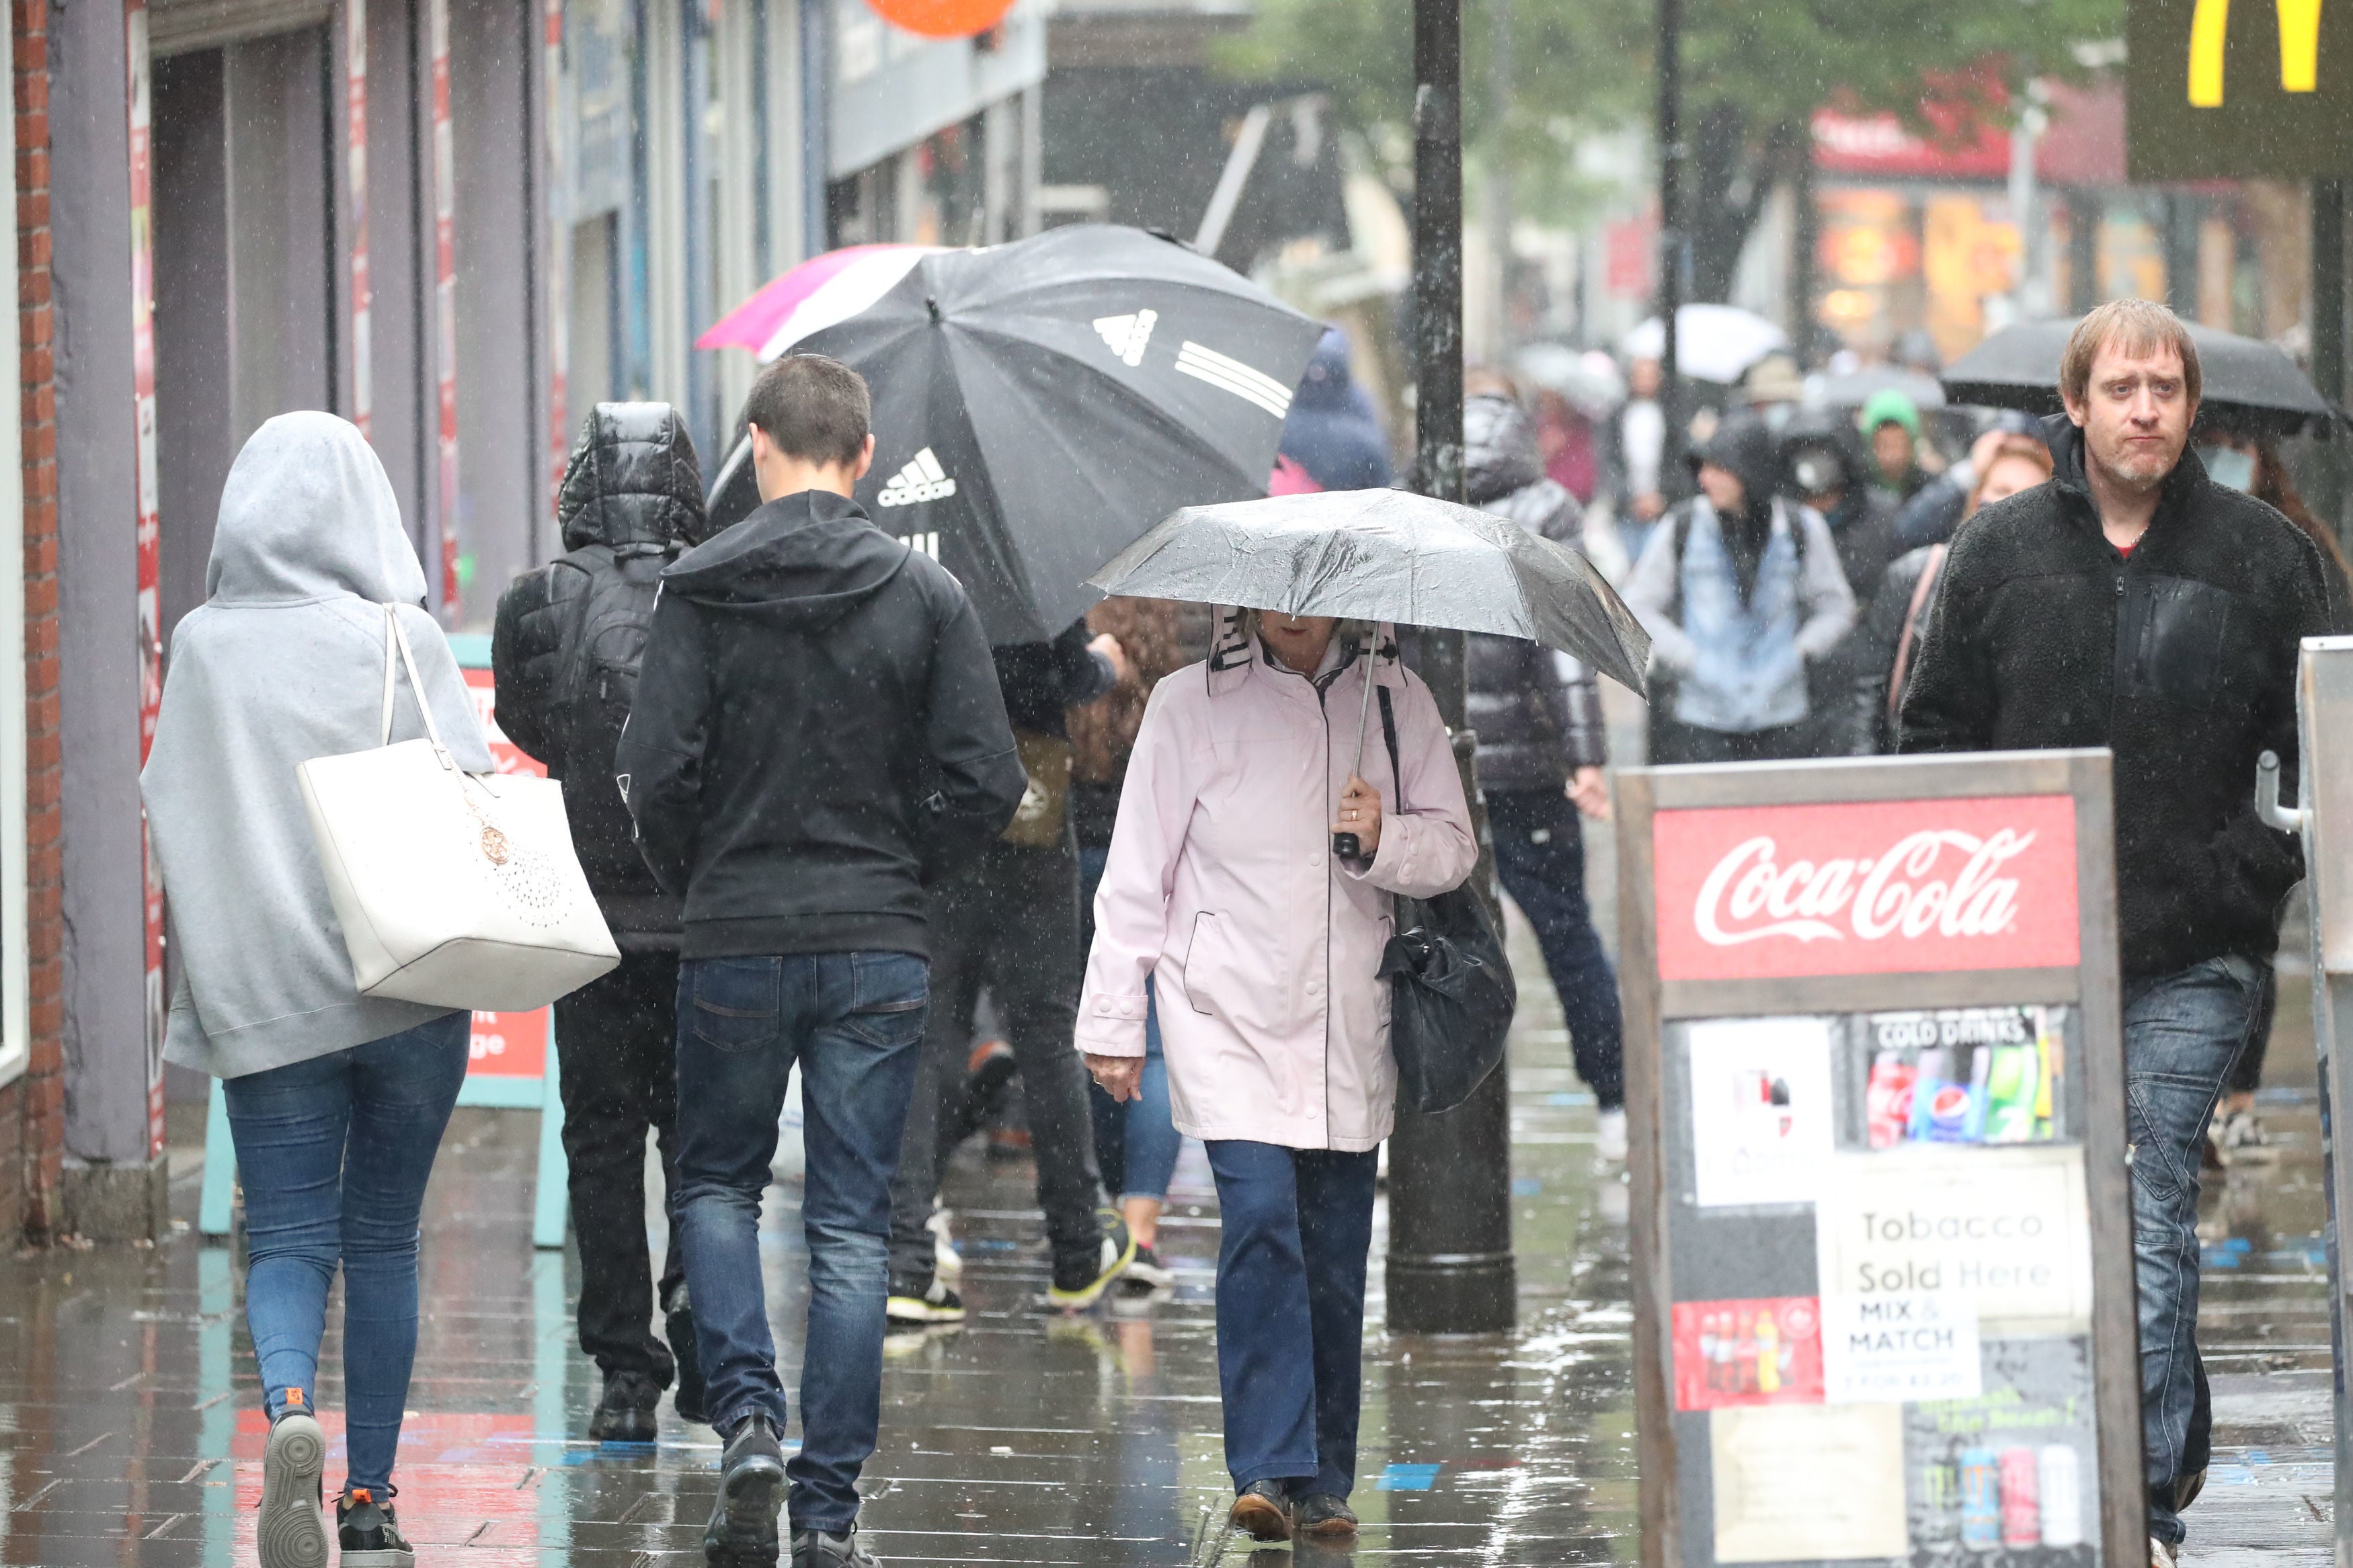 People walk through central Nottingham in the rain on 3 October, 2020.